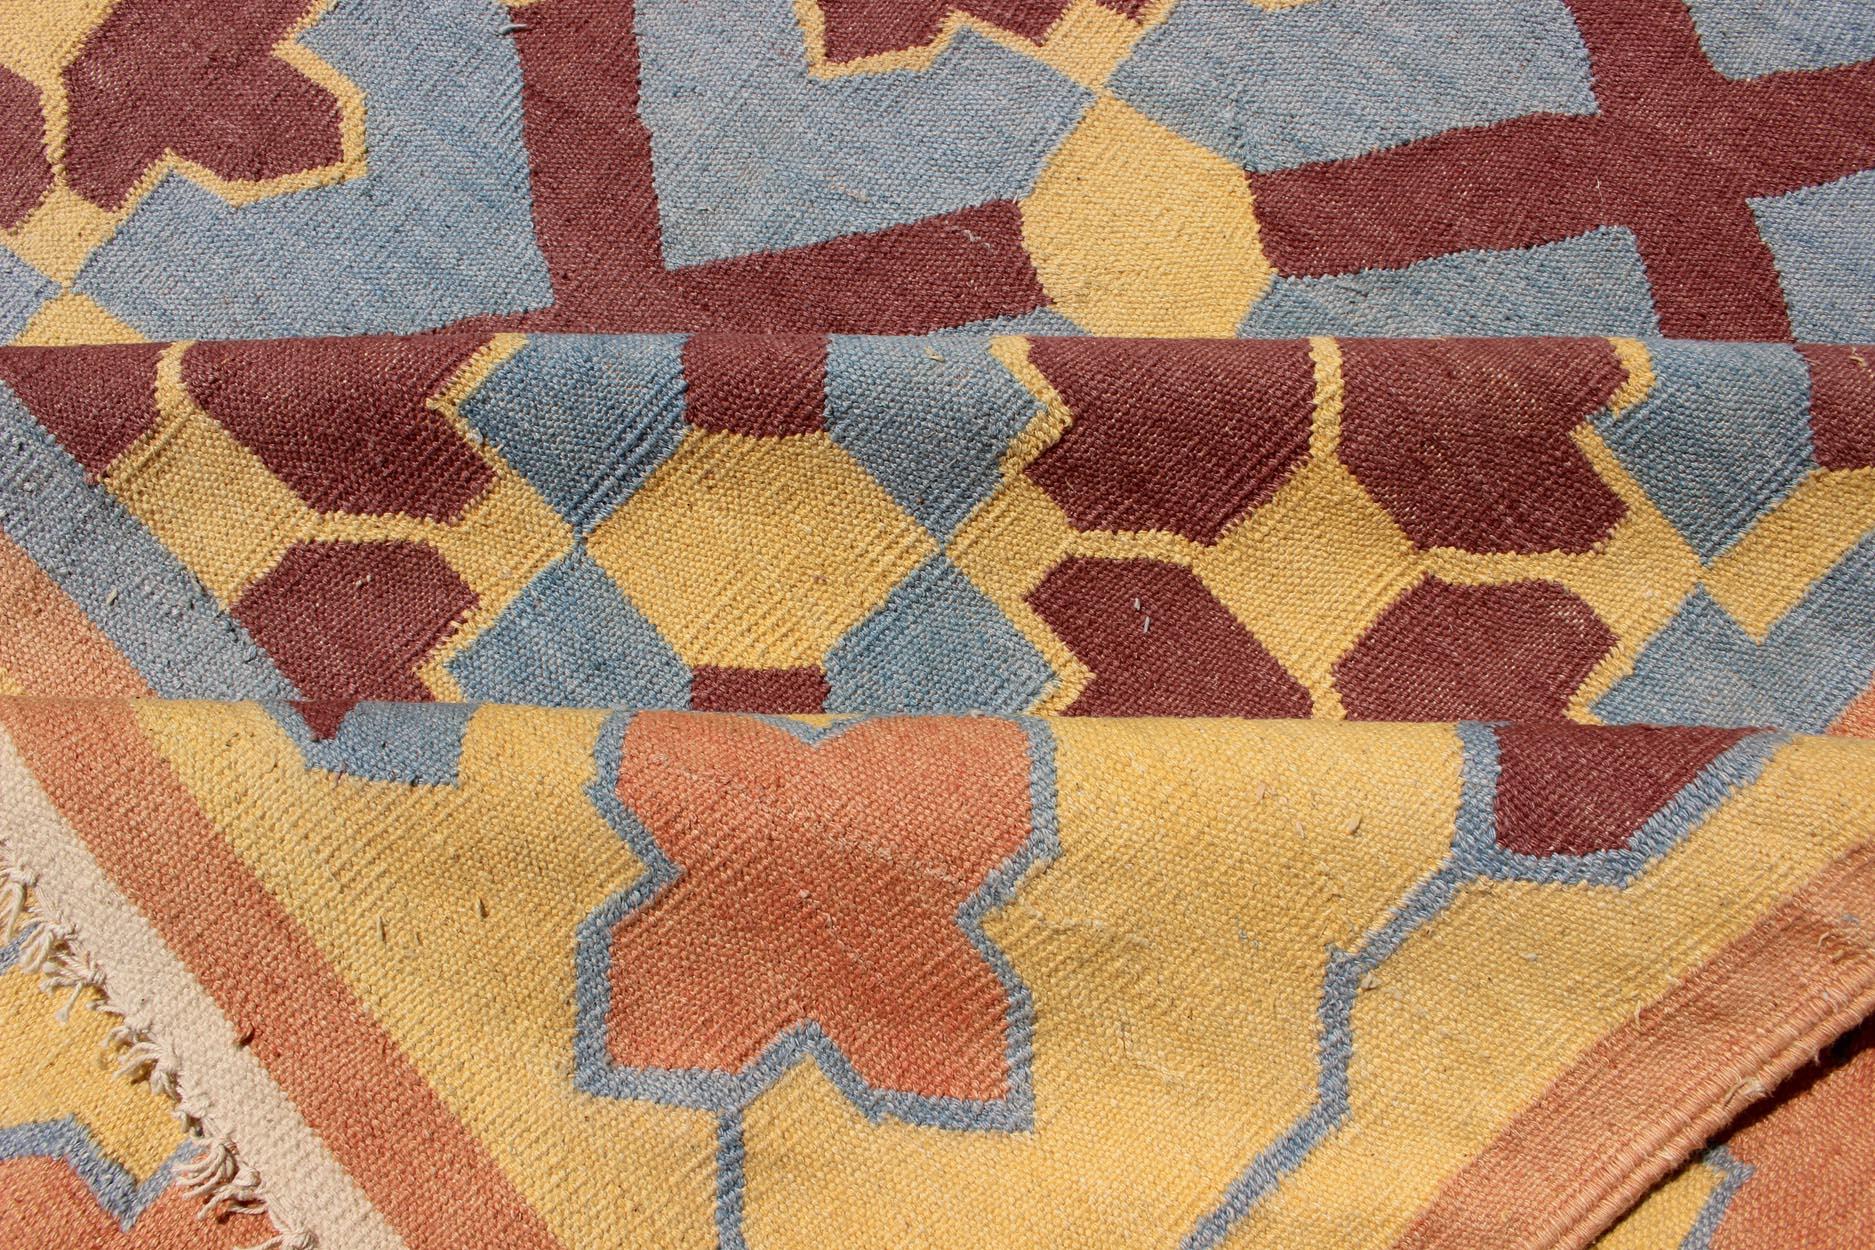 Hand-Woven Vintage Flat Weave Cotton Dhurrie with Star Pattern in Blue, Yellow & Brown Red For Sale